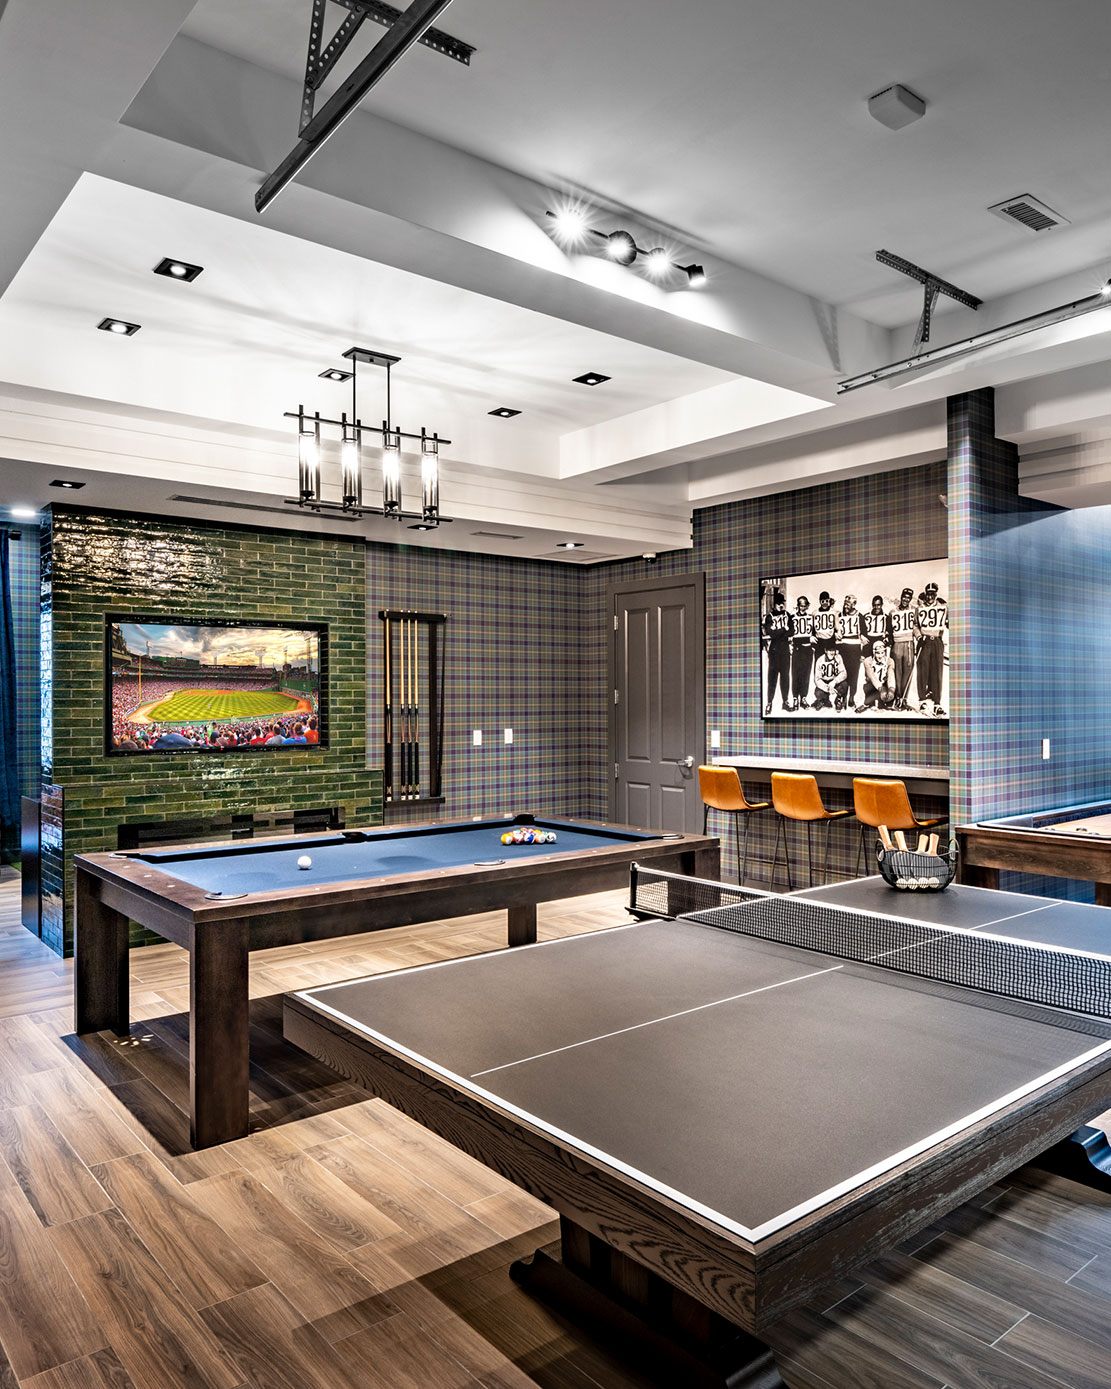 Clubhouse with pool table and televisions luxury amenity for residents